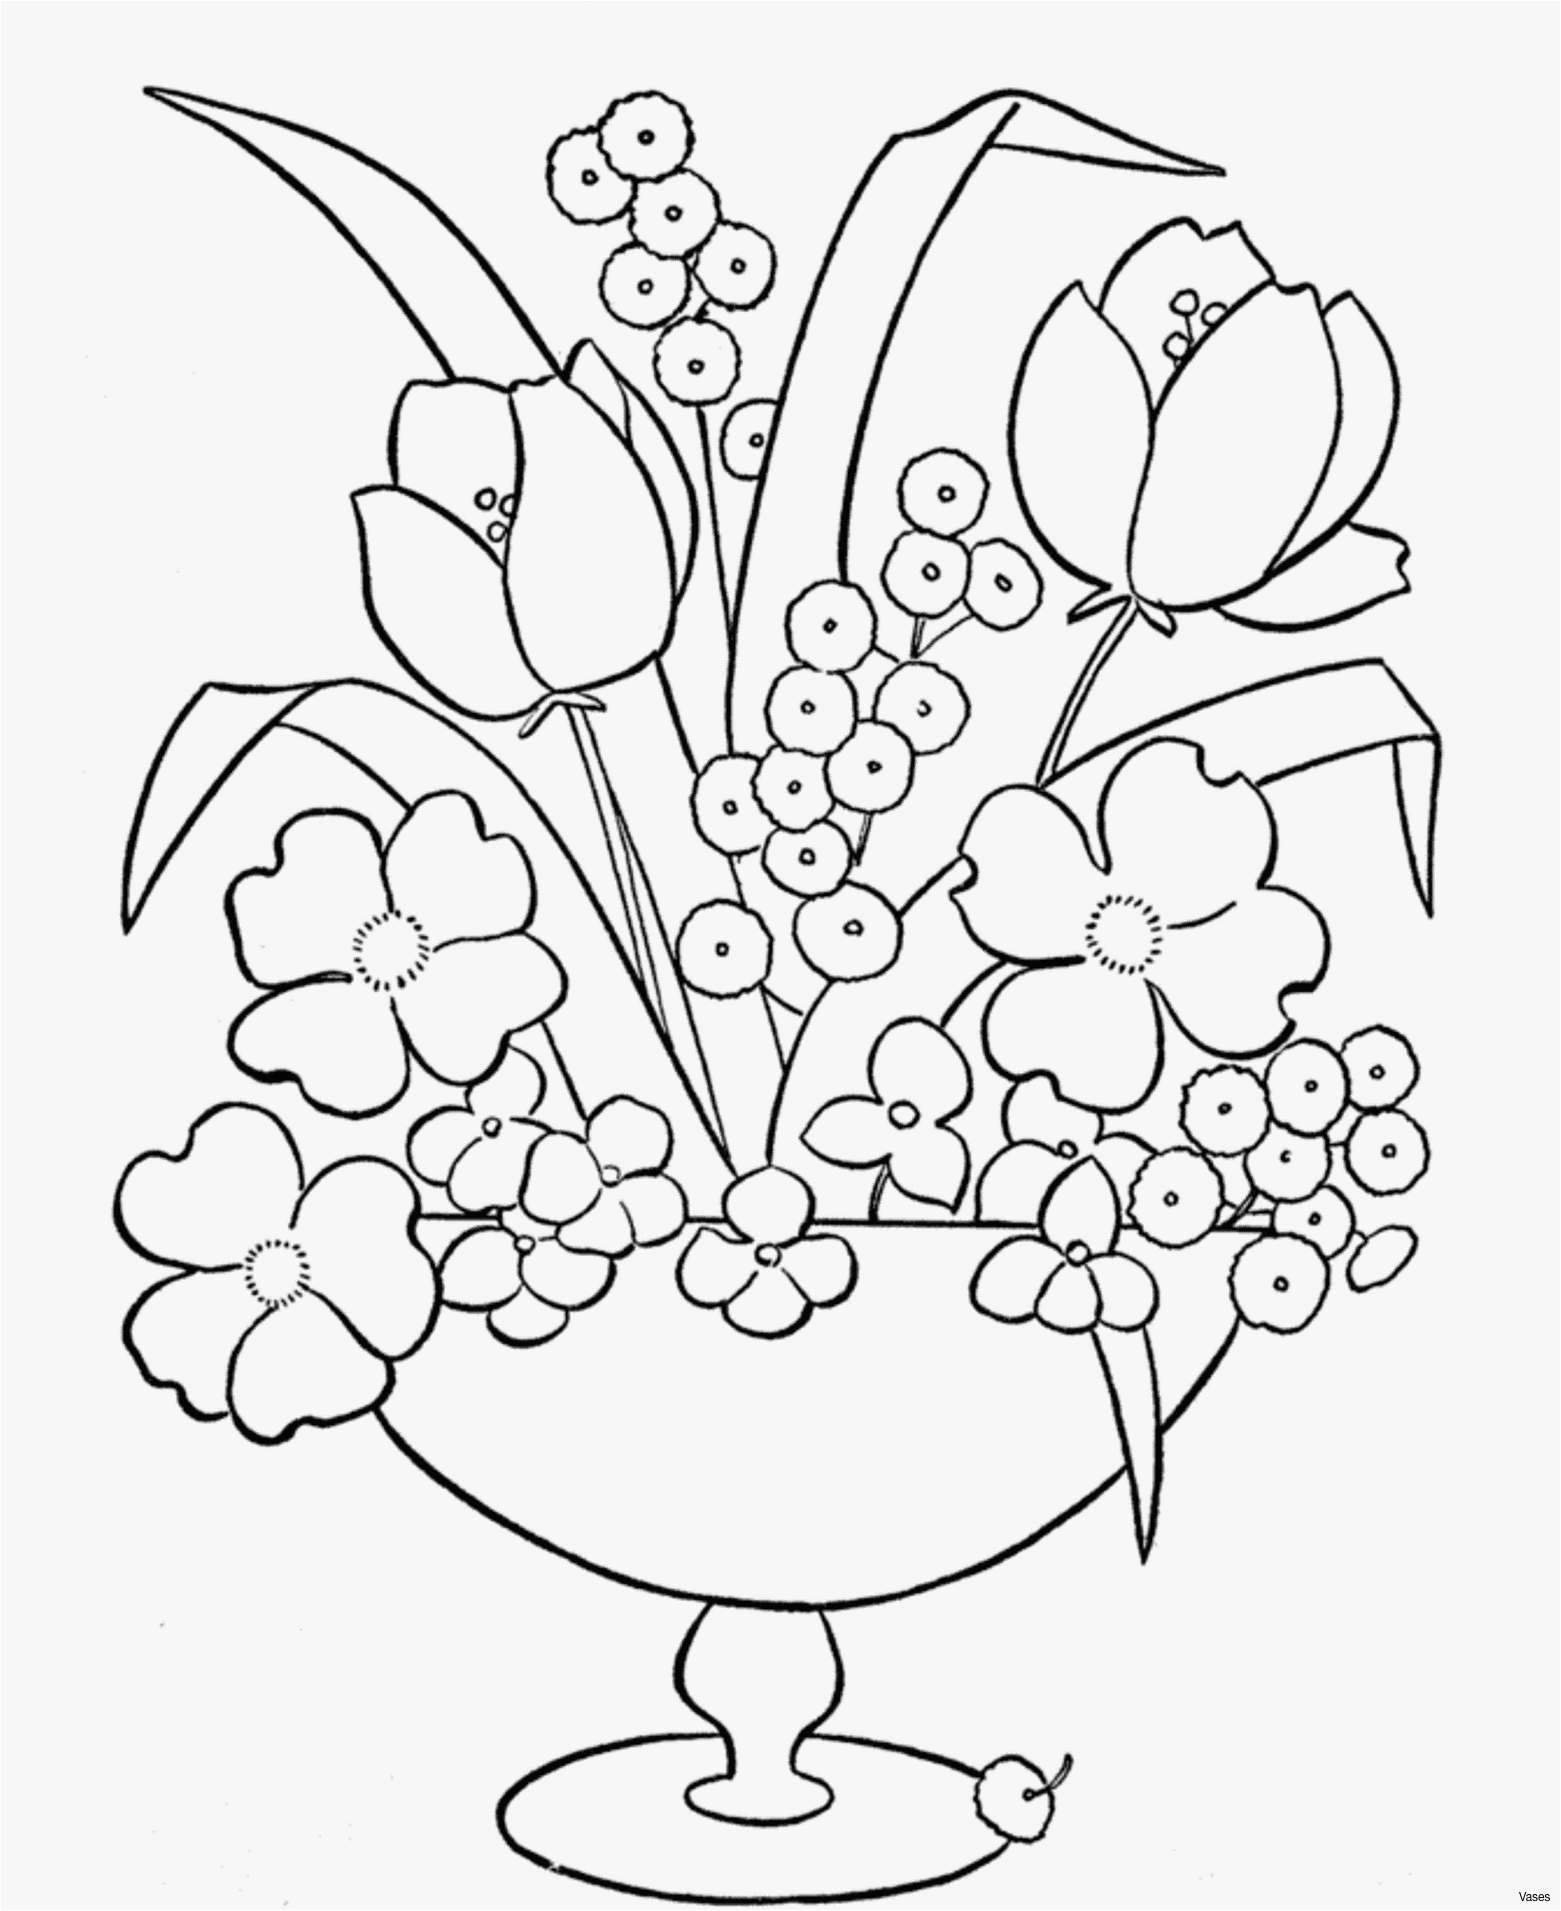 18 attractive Clay Vase Designs 2024 free download clay vase designs of best flowers opinion big top coloring pages unique cool vases flower inside best flowers 2018 big top coloring pages unique cool vases flower vase coloring page idea